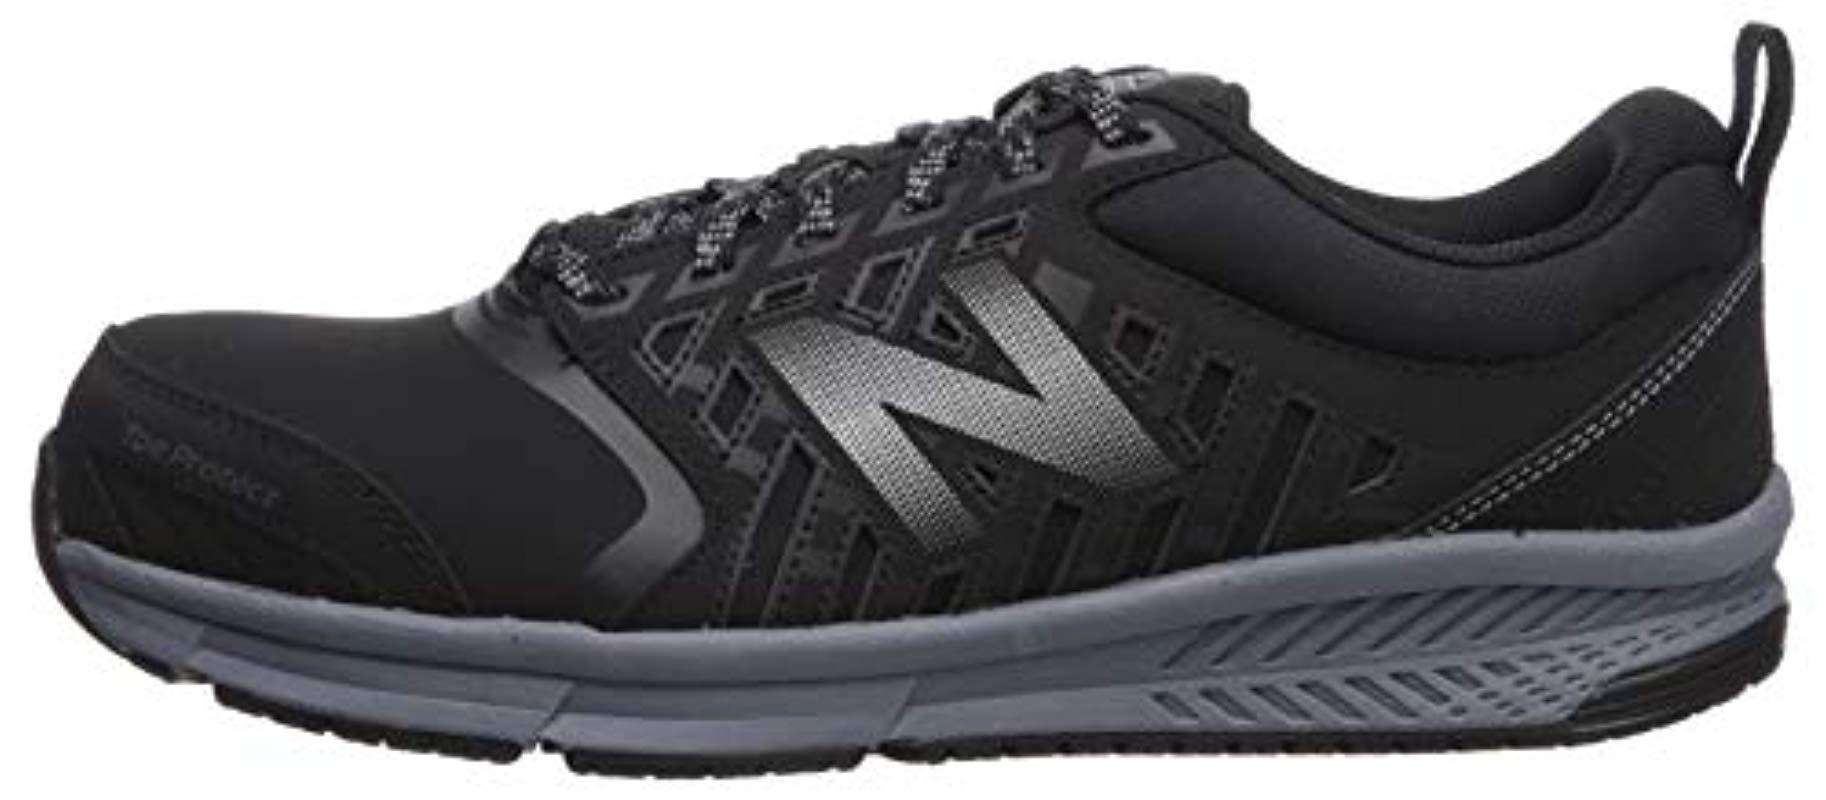 New Balance Synthetic 412v1 Work Industrial Shoe, Black/silver, 14 4e ...